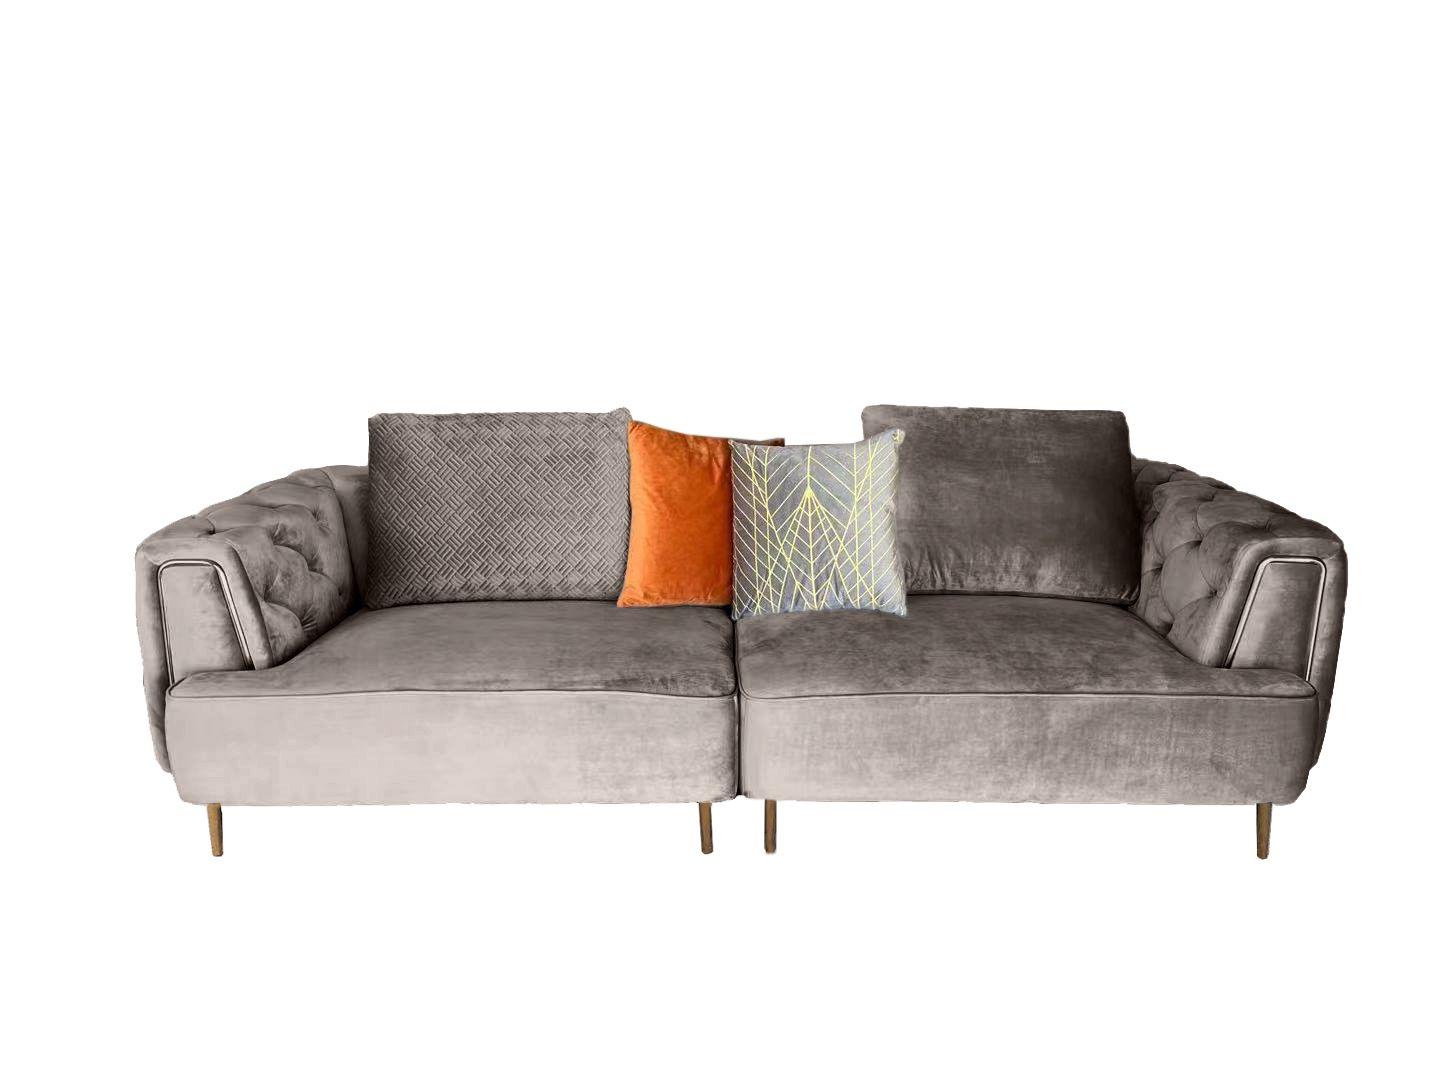 Contemporary Extra Long Sofa AE-D832-GR-4S AE-D832-GR-4S in Gray Fabric